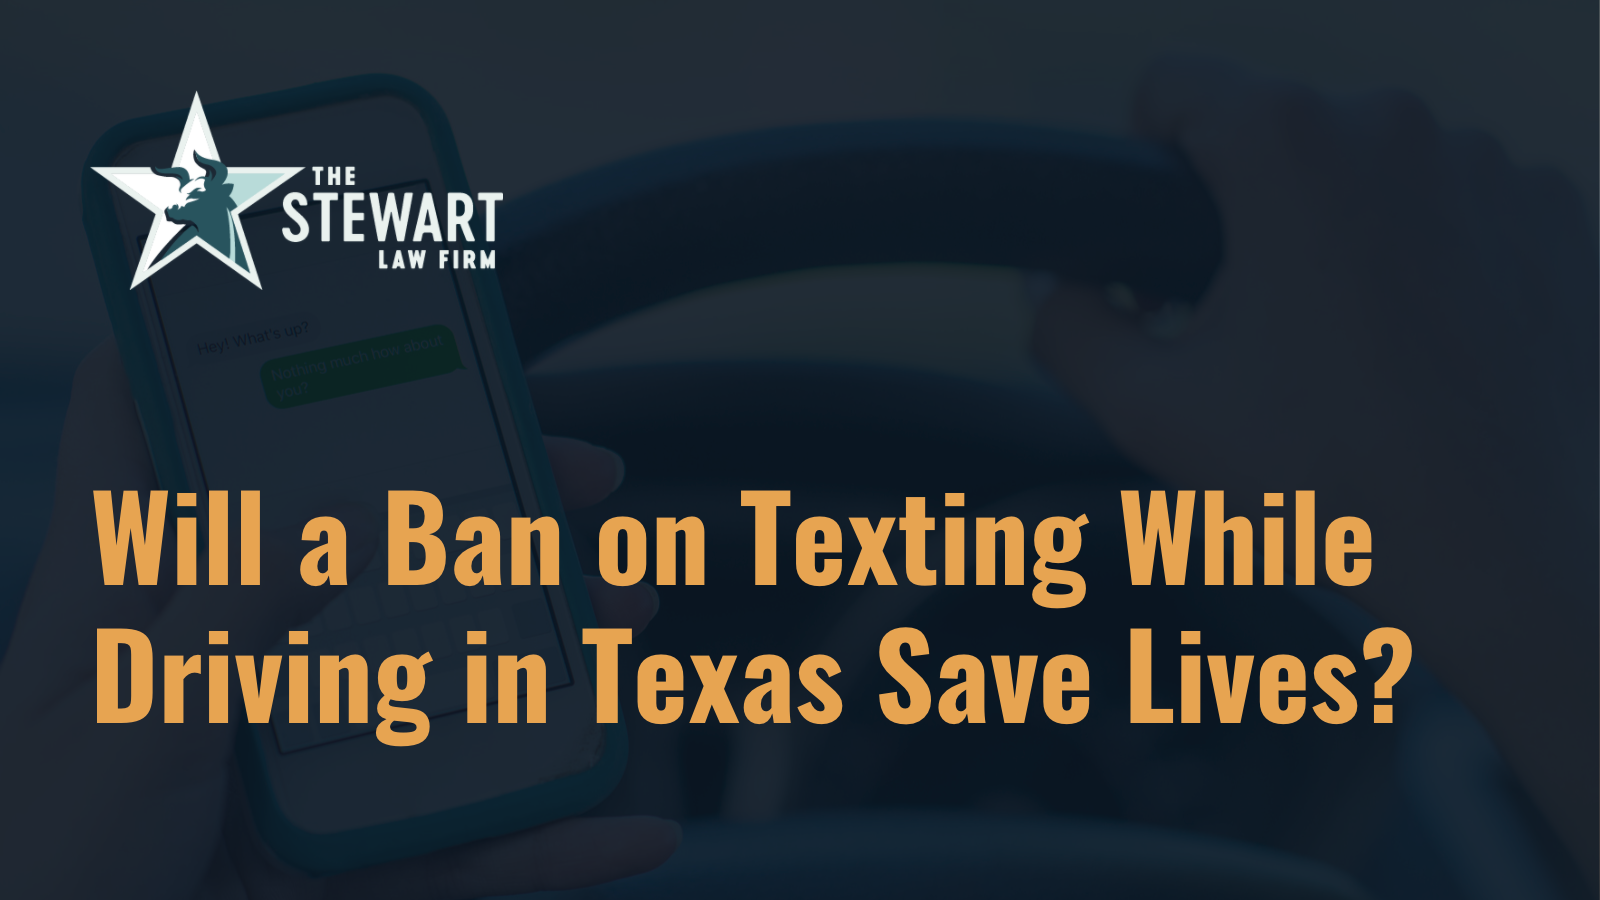 Texting While Driving in Texas - the stewart law firm - austin texas personal injury lawyer